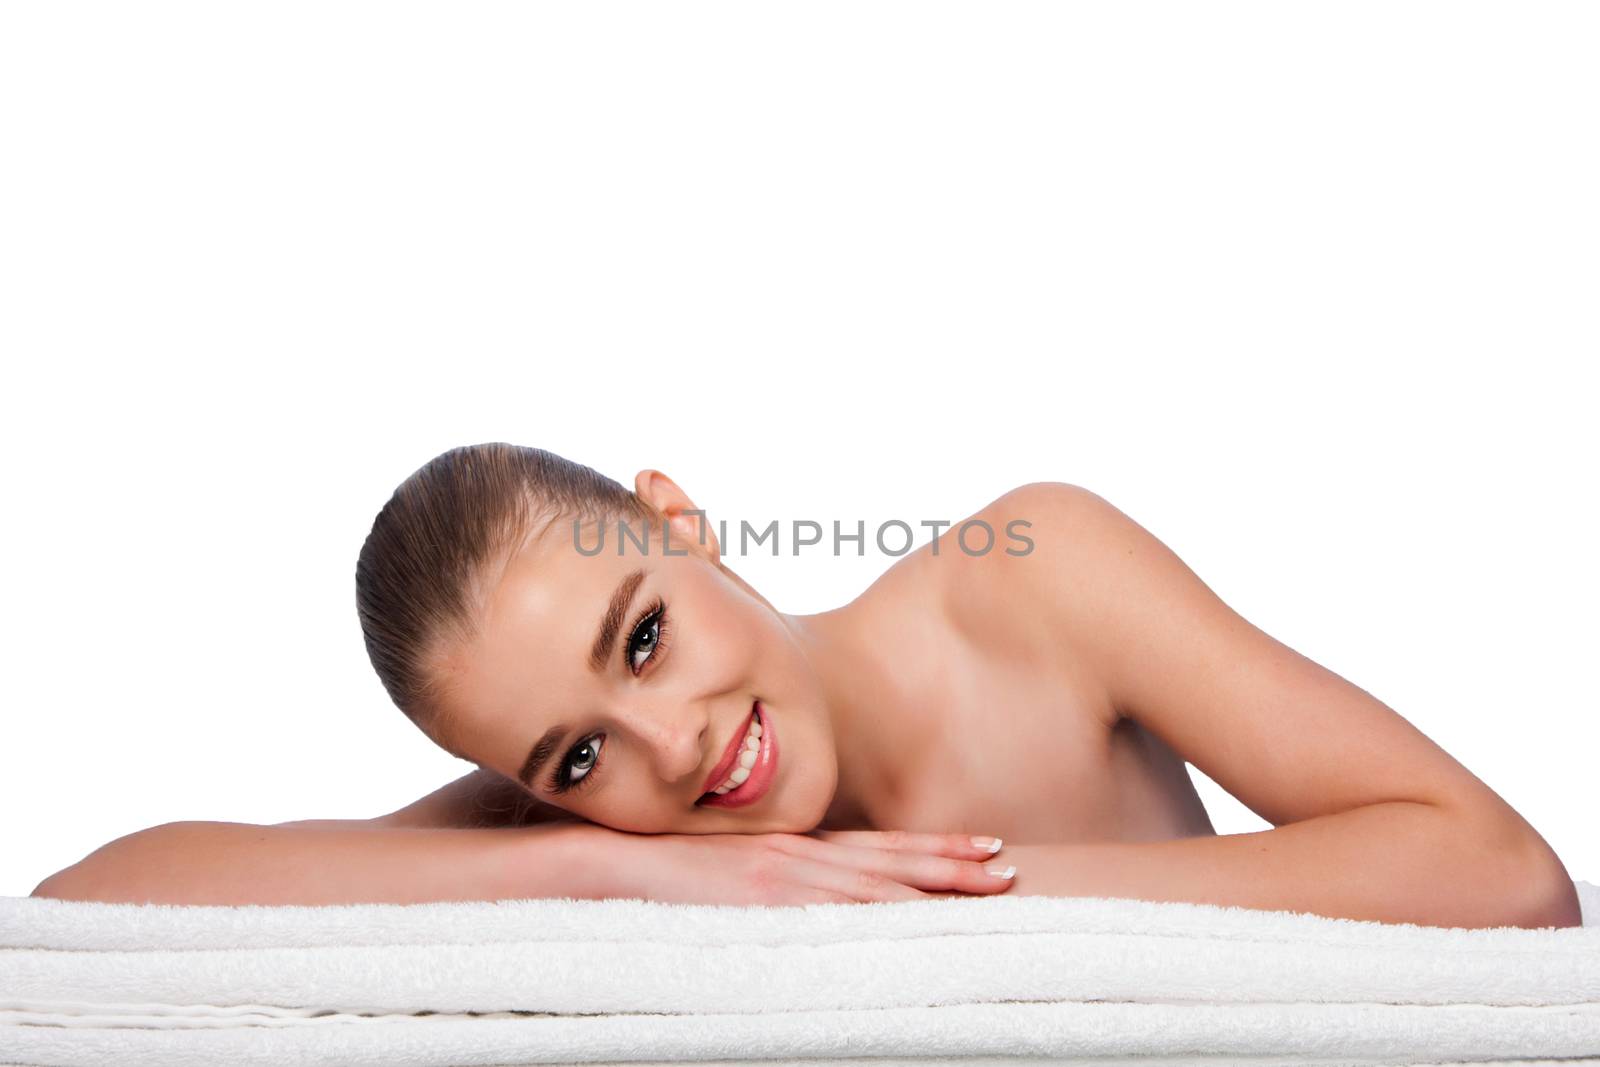 Beautiful woman at spa laying on towels waiting for exfoliating skincare treatment, on white.